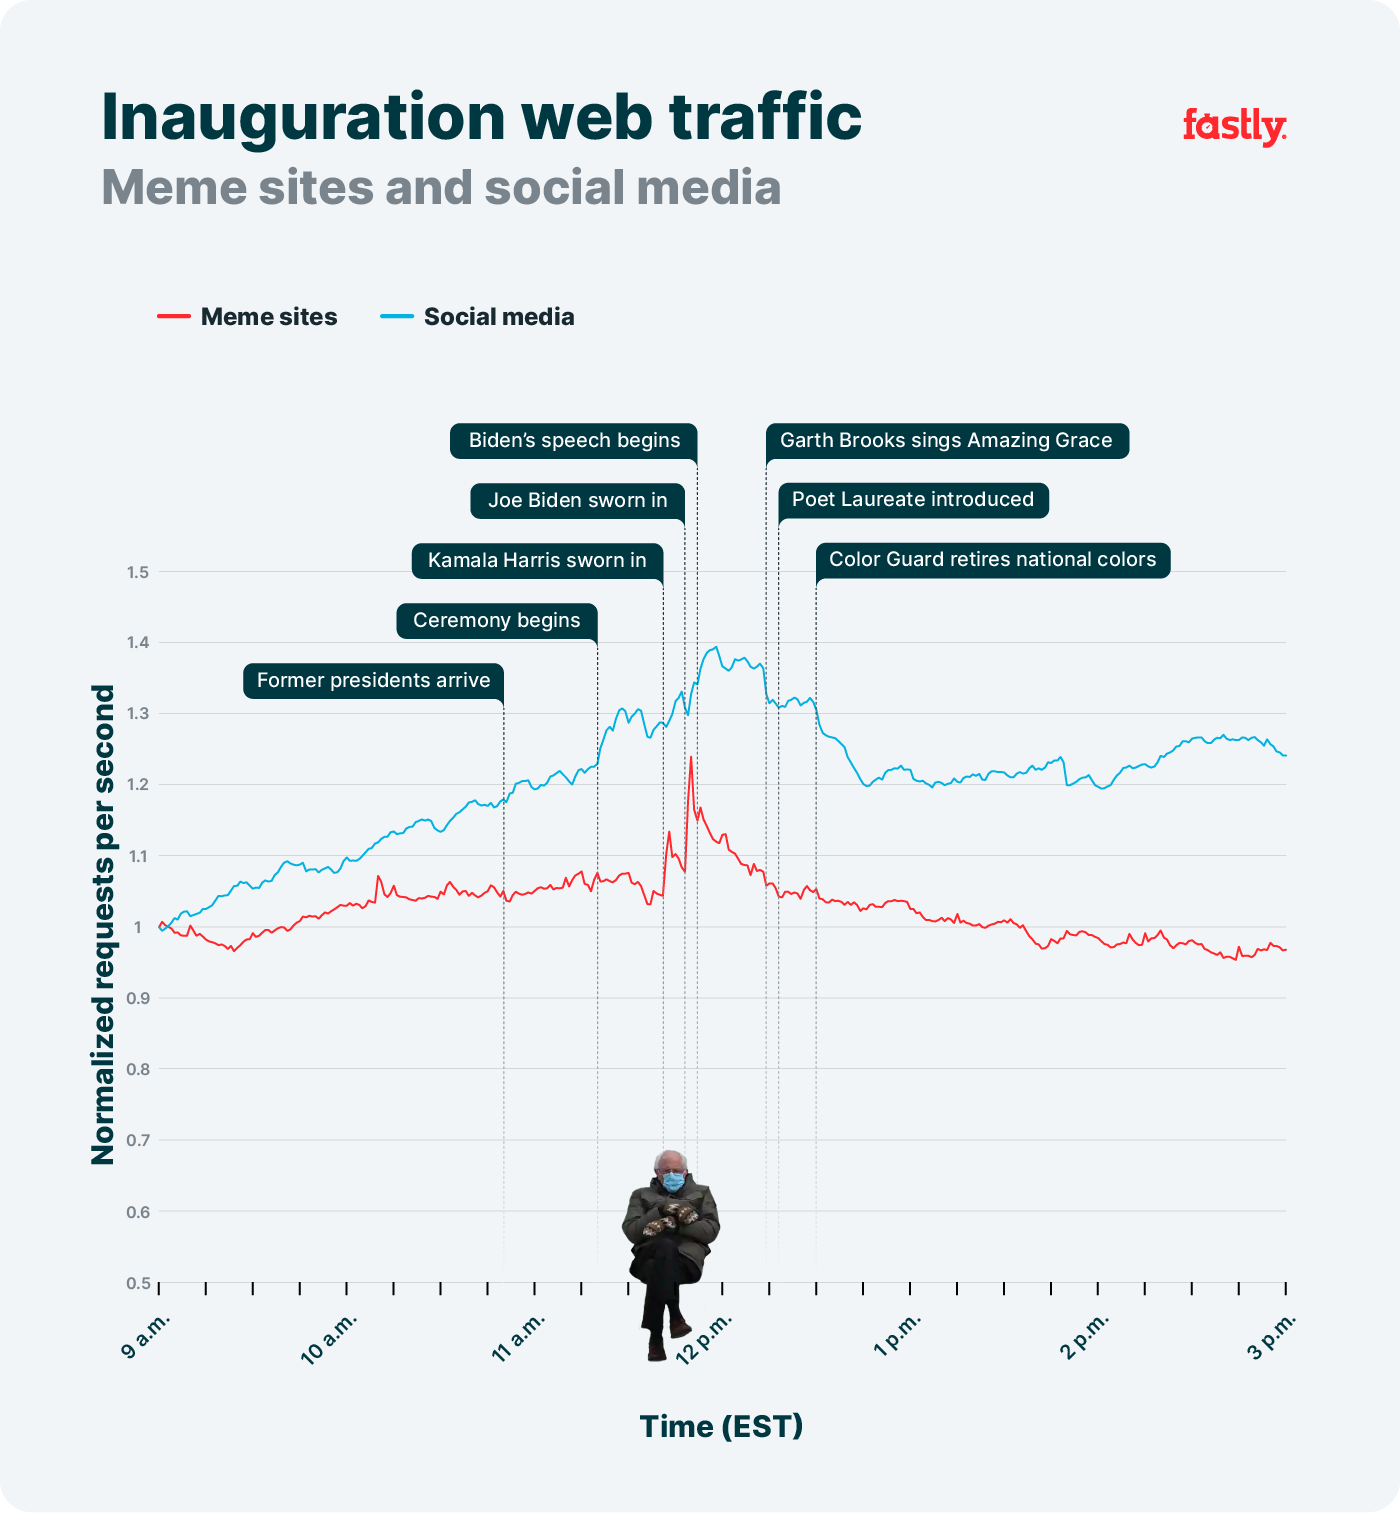 Meme sites and social media during inauguration